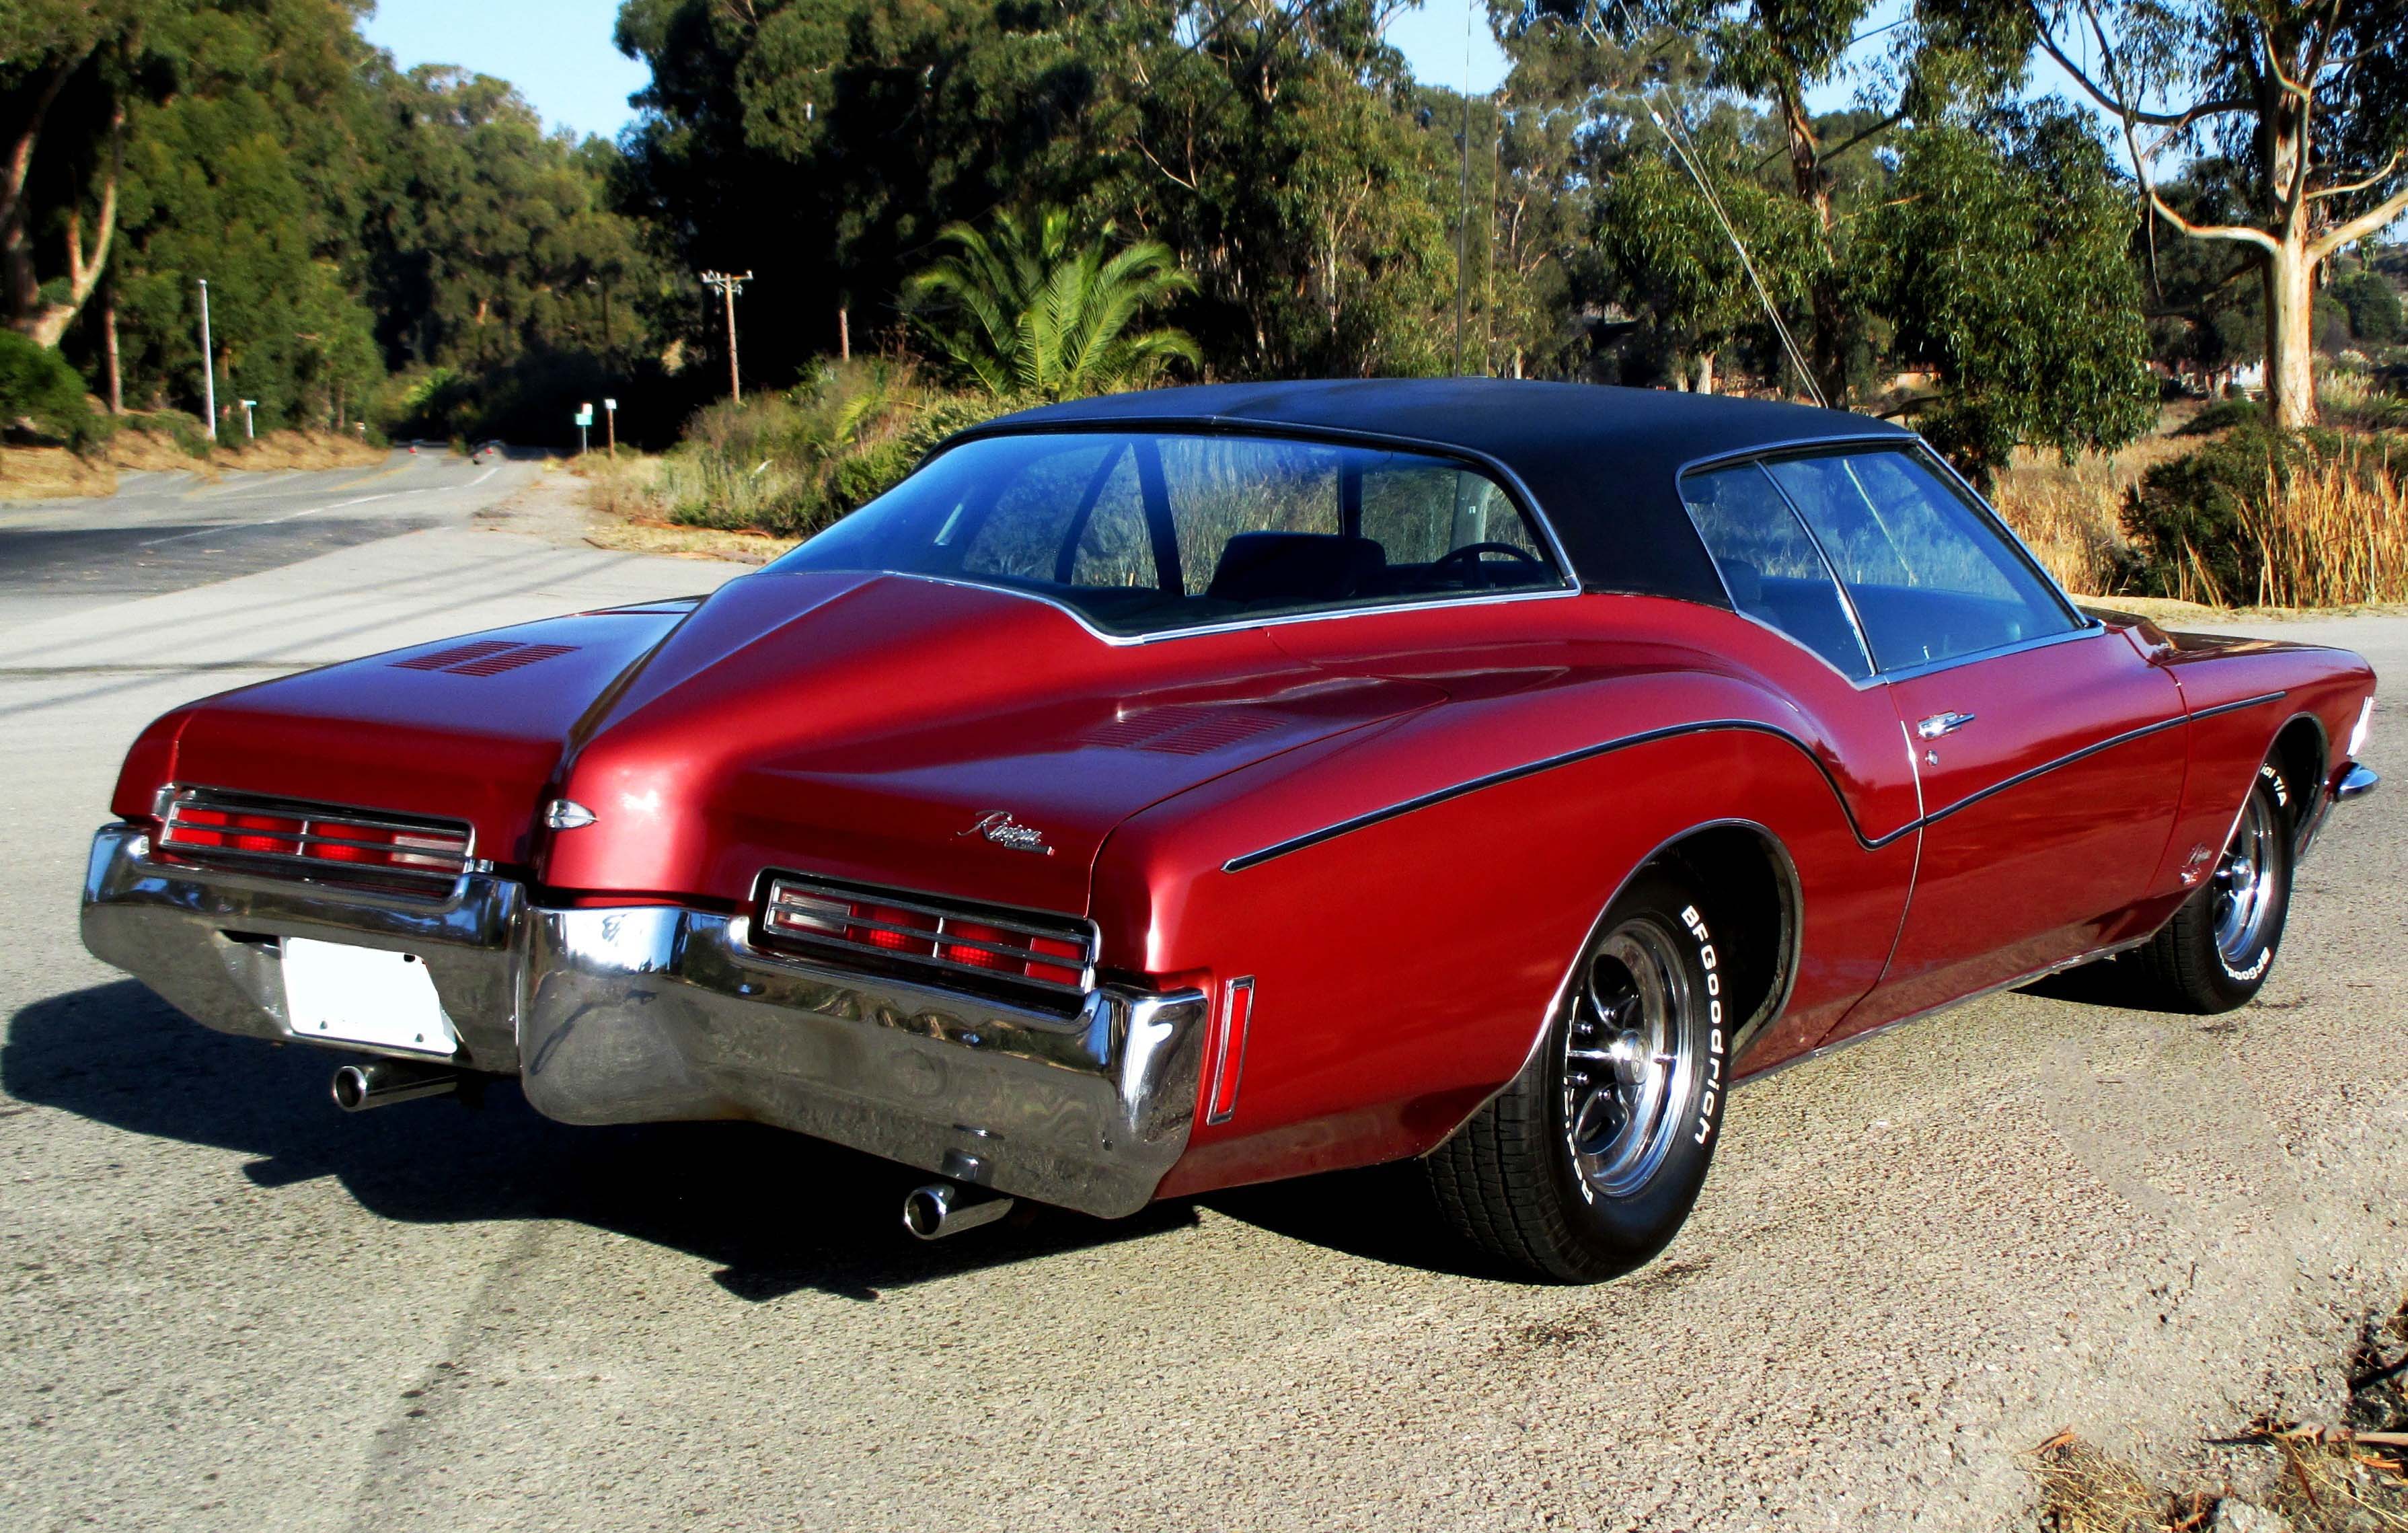 Buick Riviera GS wallpapers, Vehicles, HQ Buick Riviera GS pictures